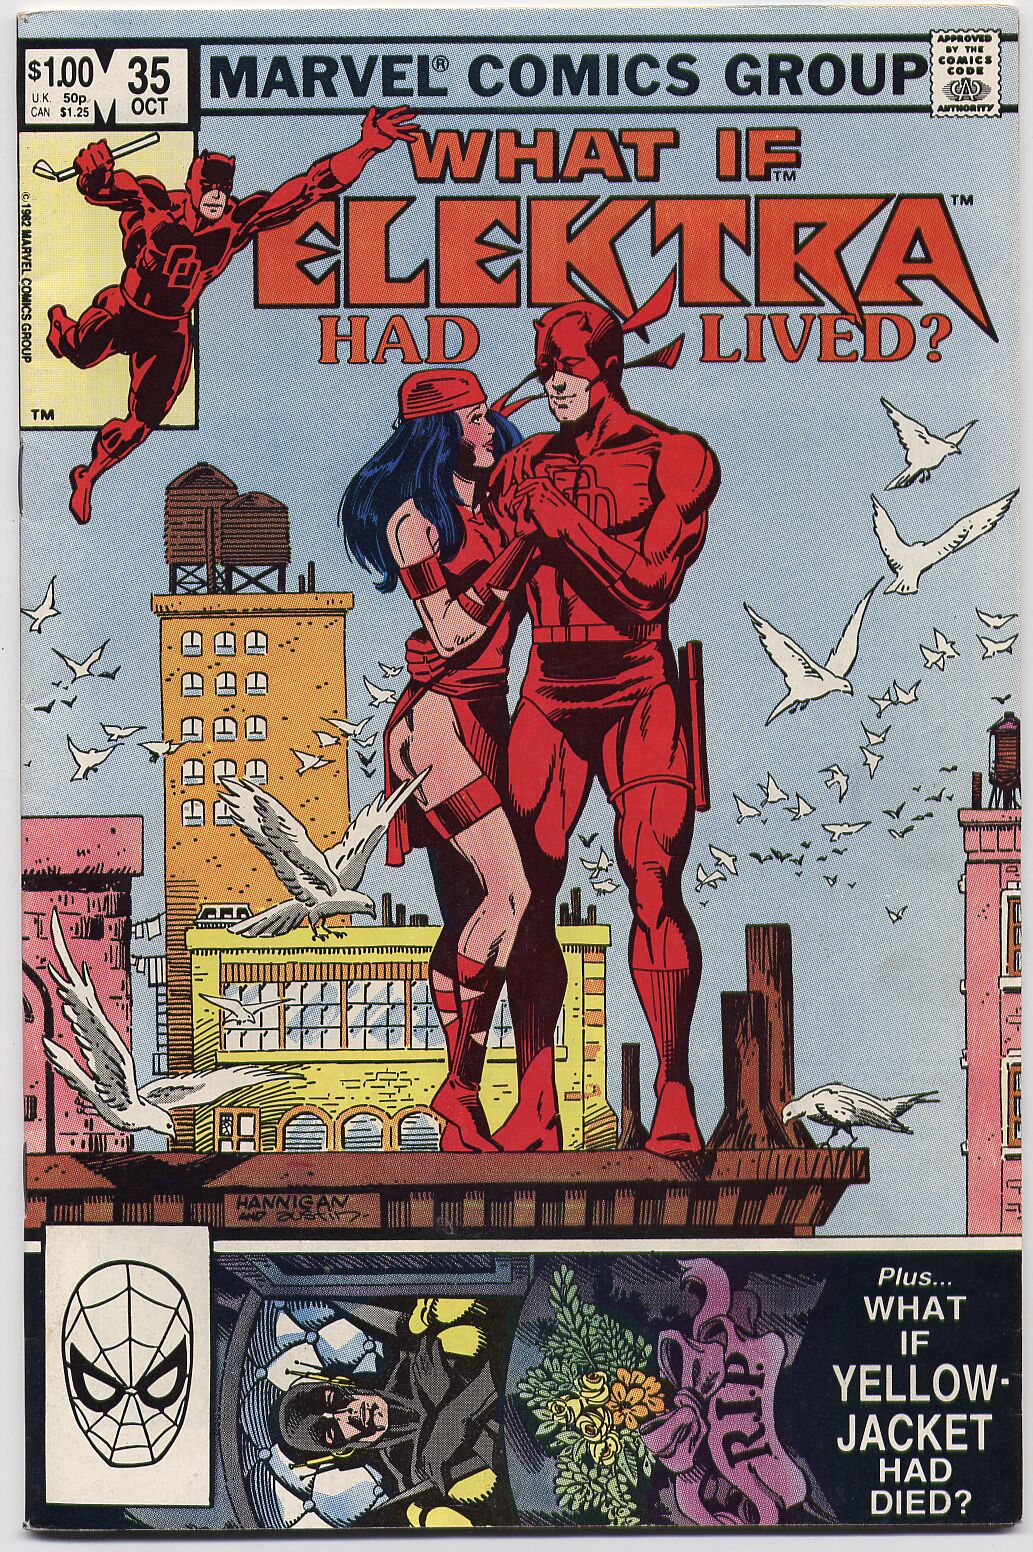 What If? (1977) issue 35 - Elektra had lived - Page 1